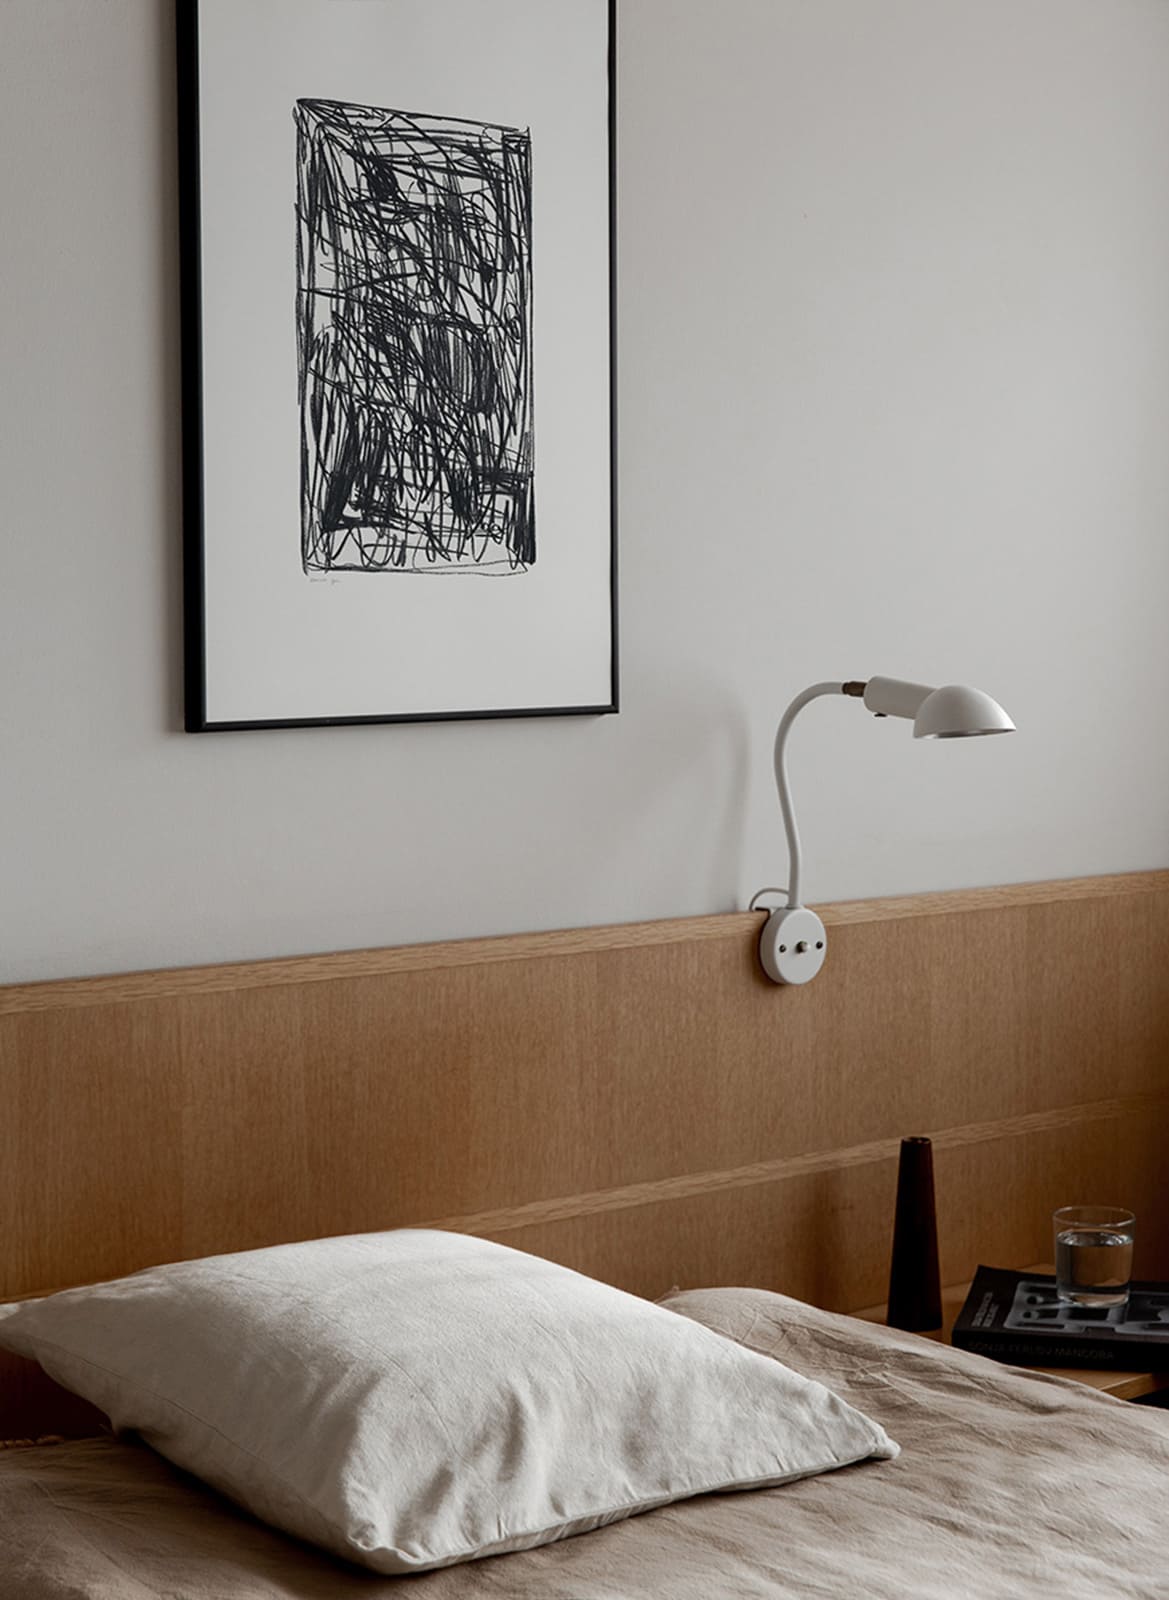  Framed minimalistic poster hanging above a bed by Atelier Cph